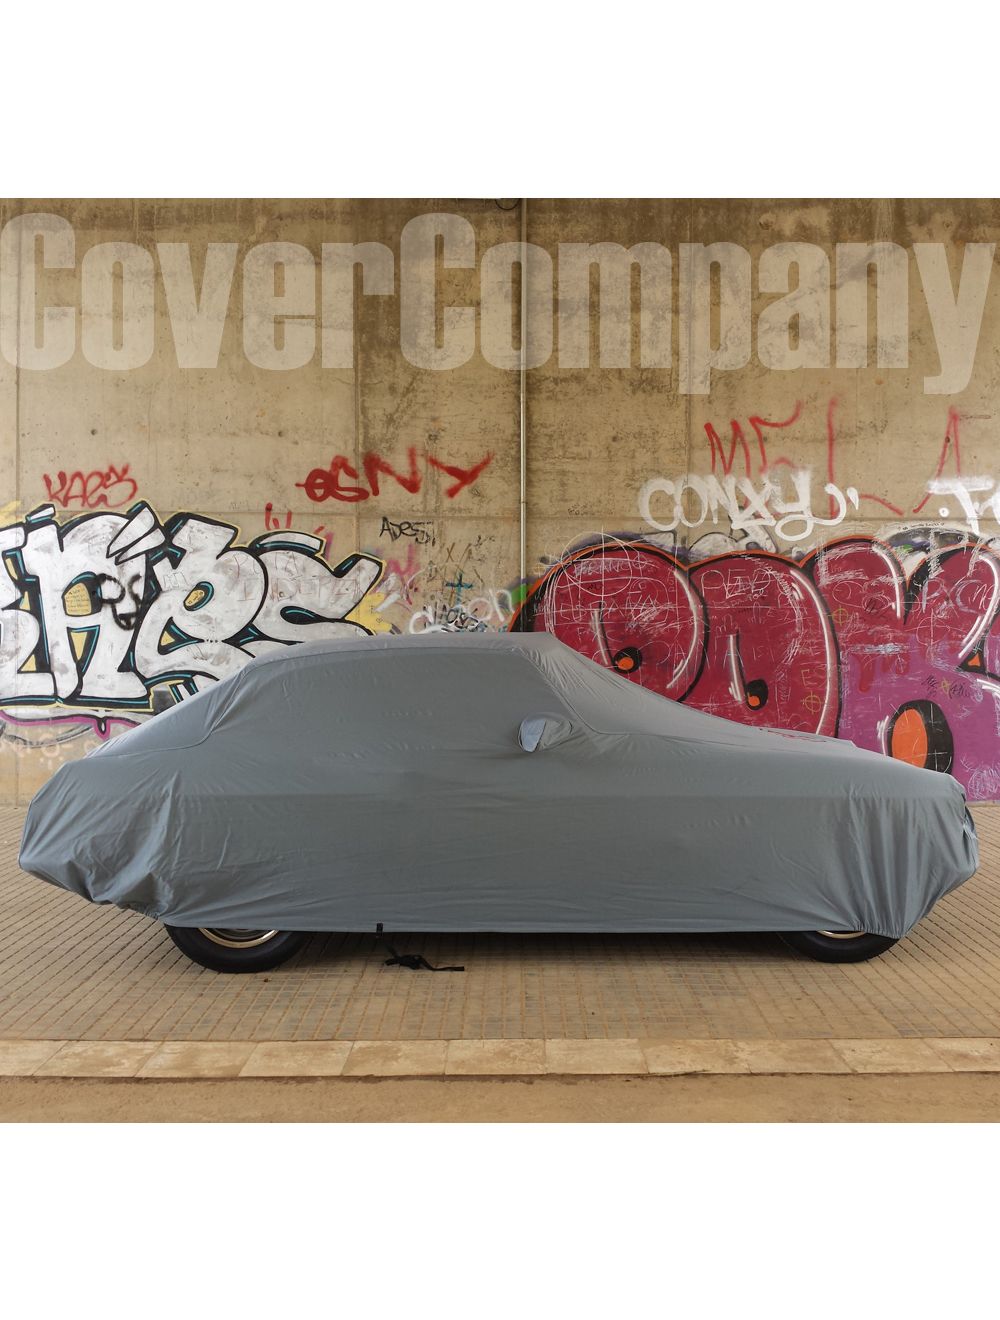  CarCovers Weatherproof Car Cover Compatible with